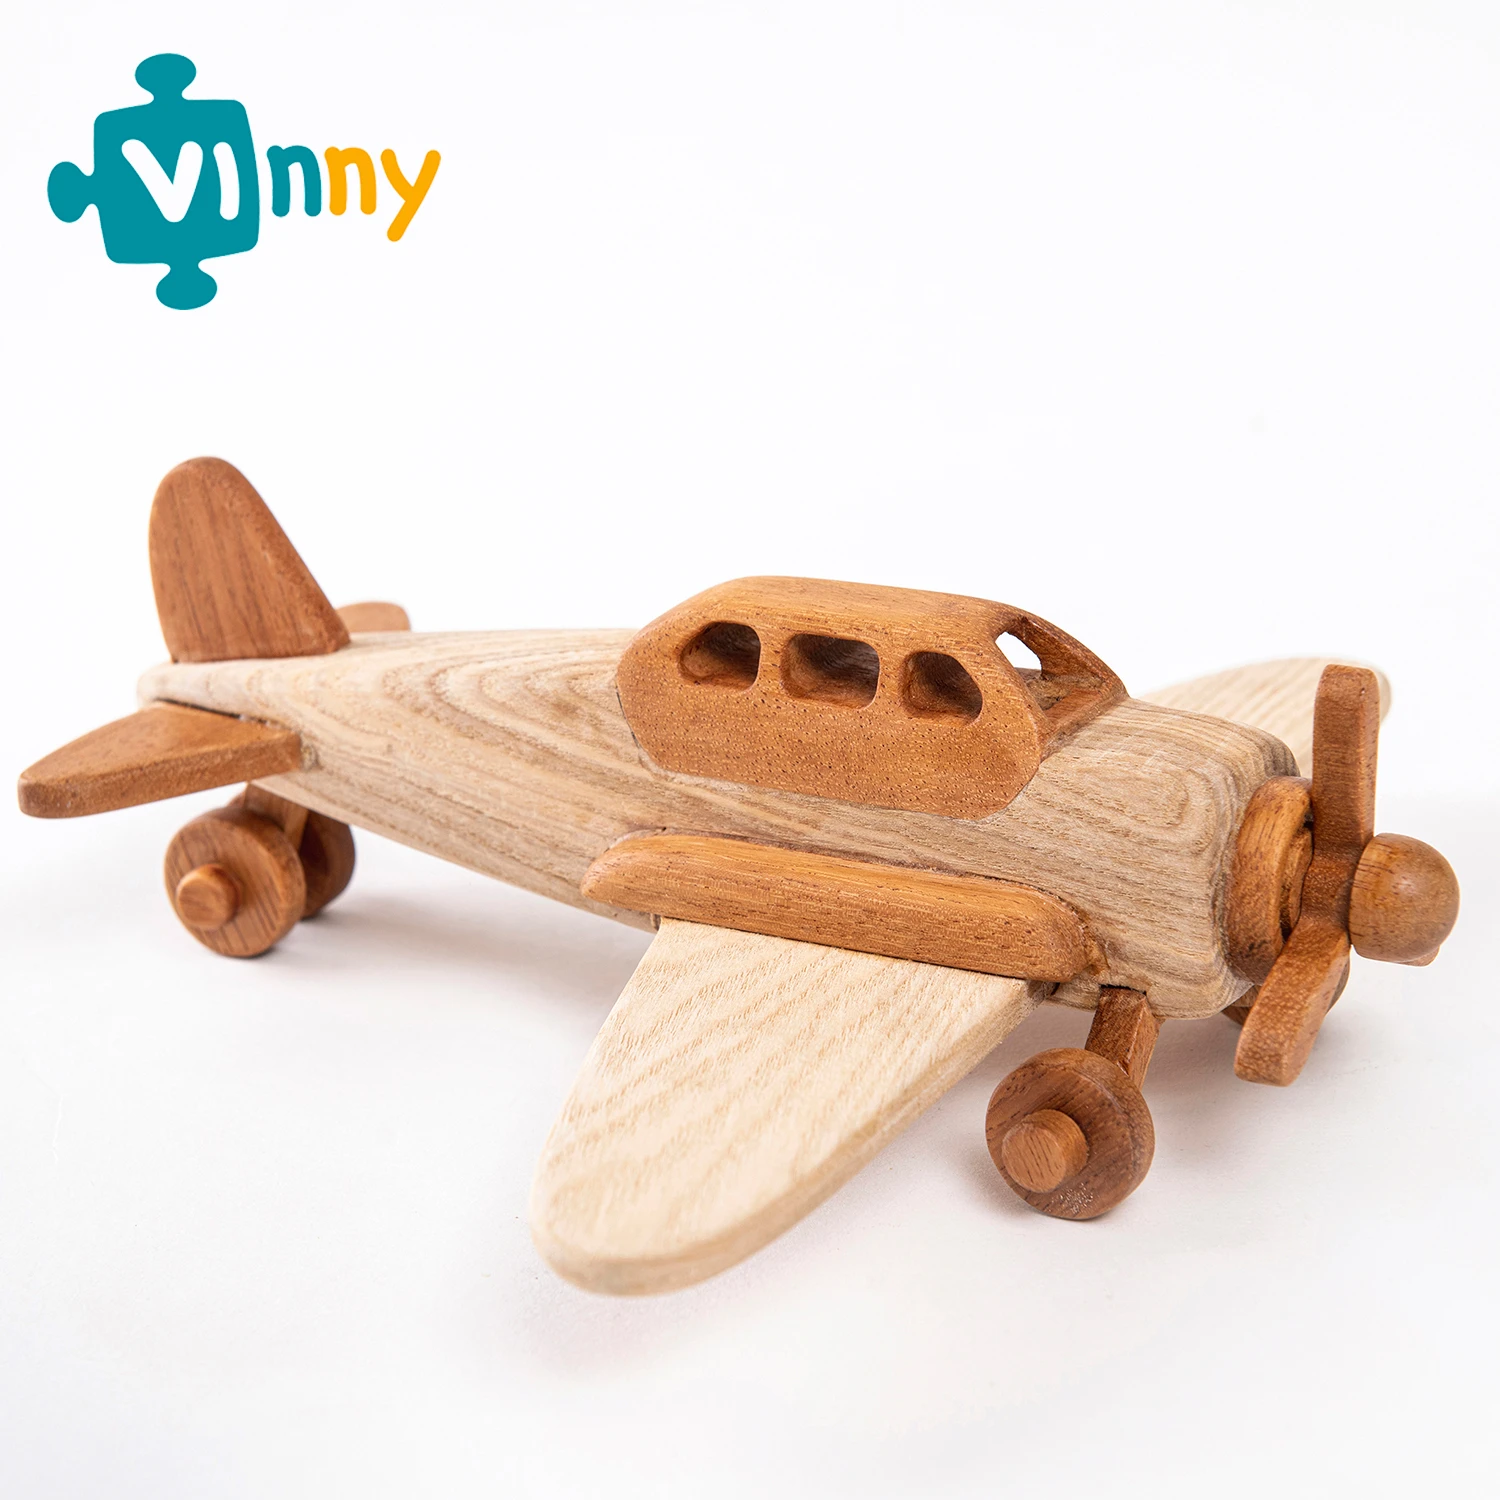 OEM - ODM Vietnamese Ash wood Airplane Vehicles - Best helicopter gift for Baby Educational Toy